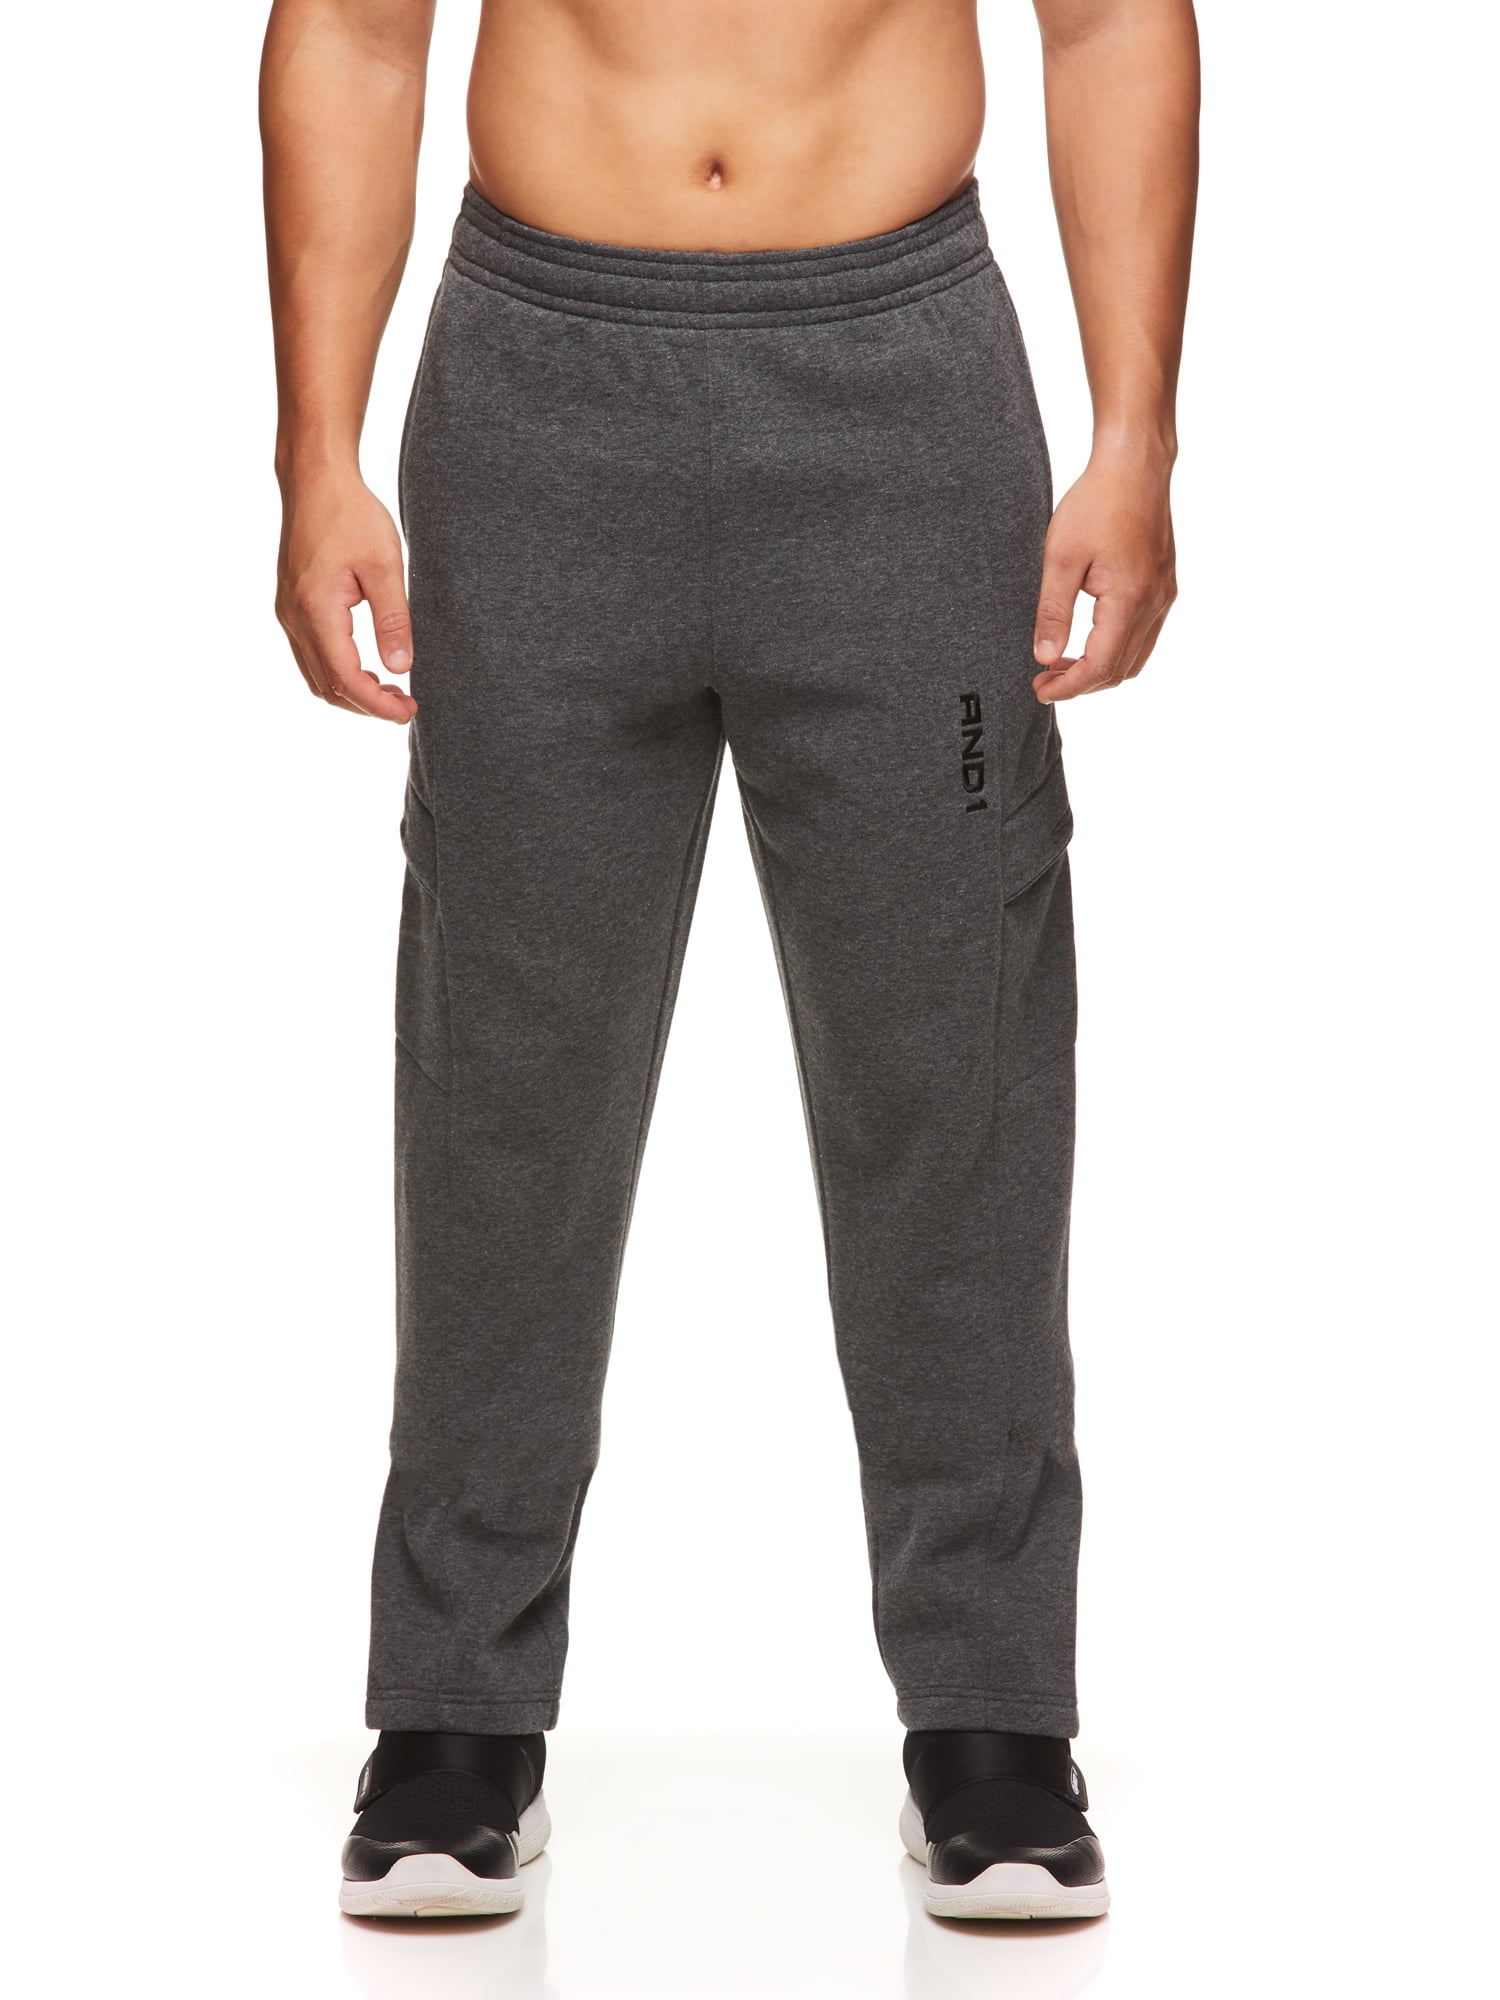 AND1 - AND1 Men's Active Double Team 2.0 Cargo Fleece Pants, up to Size ...